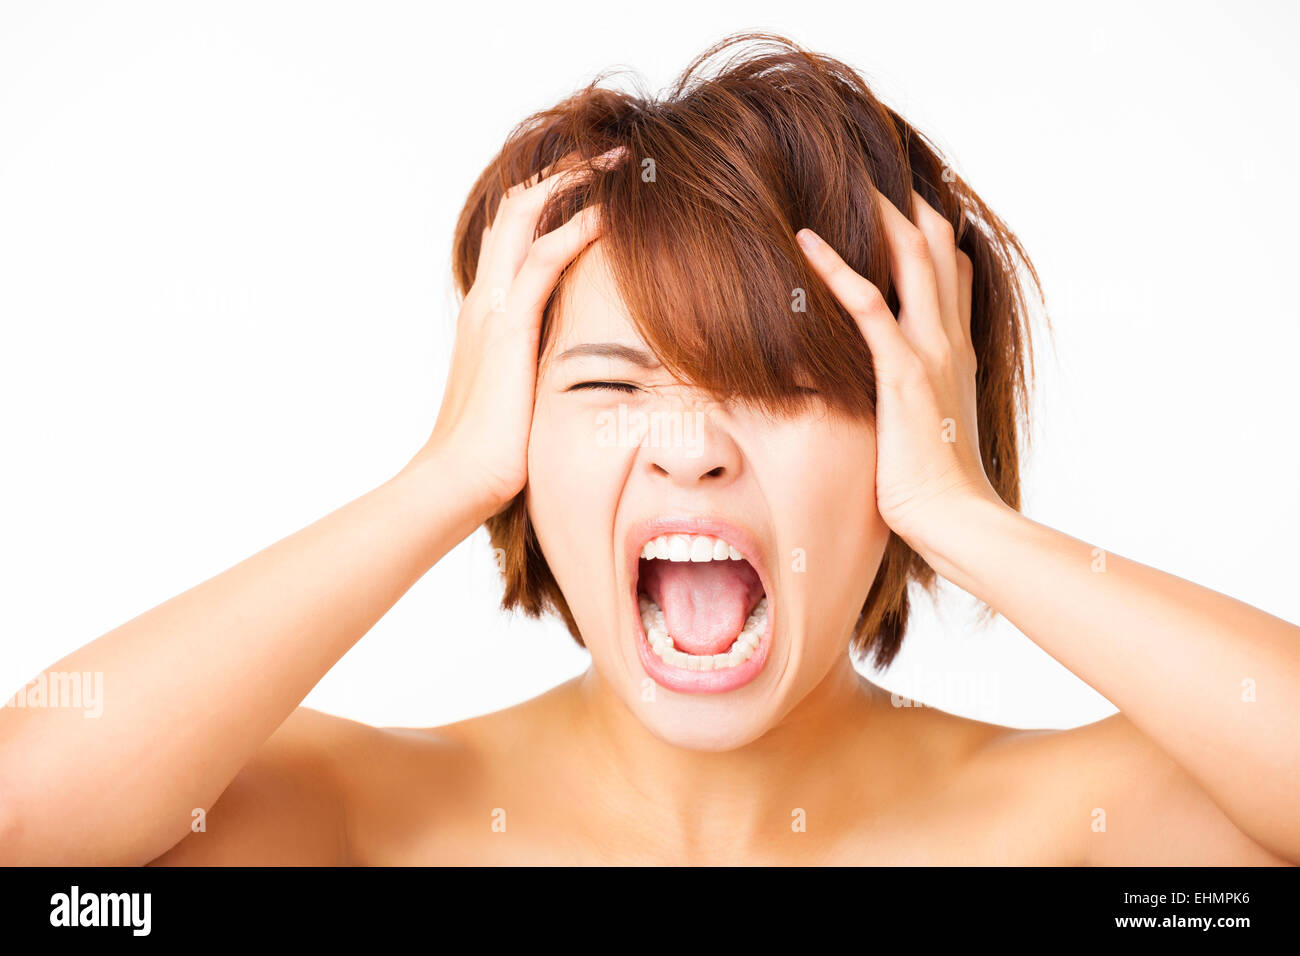 Closeup stressed young woman and yelling screaming Stock Photo